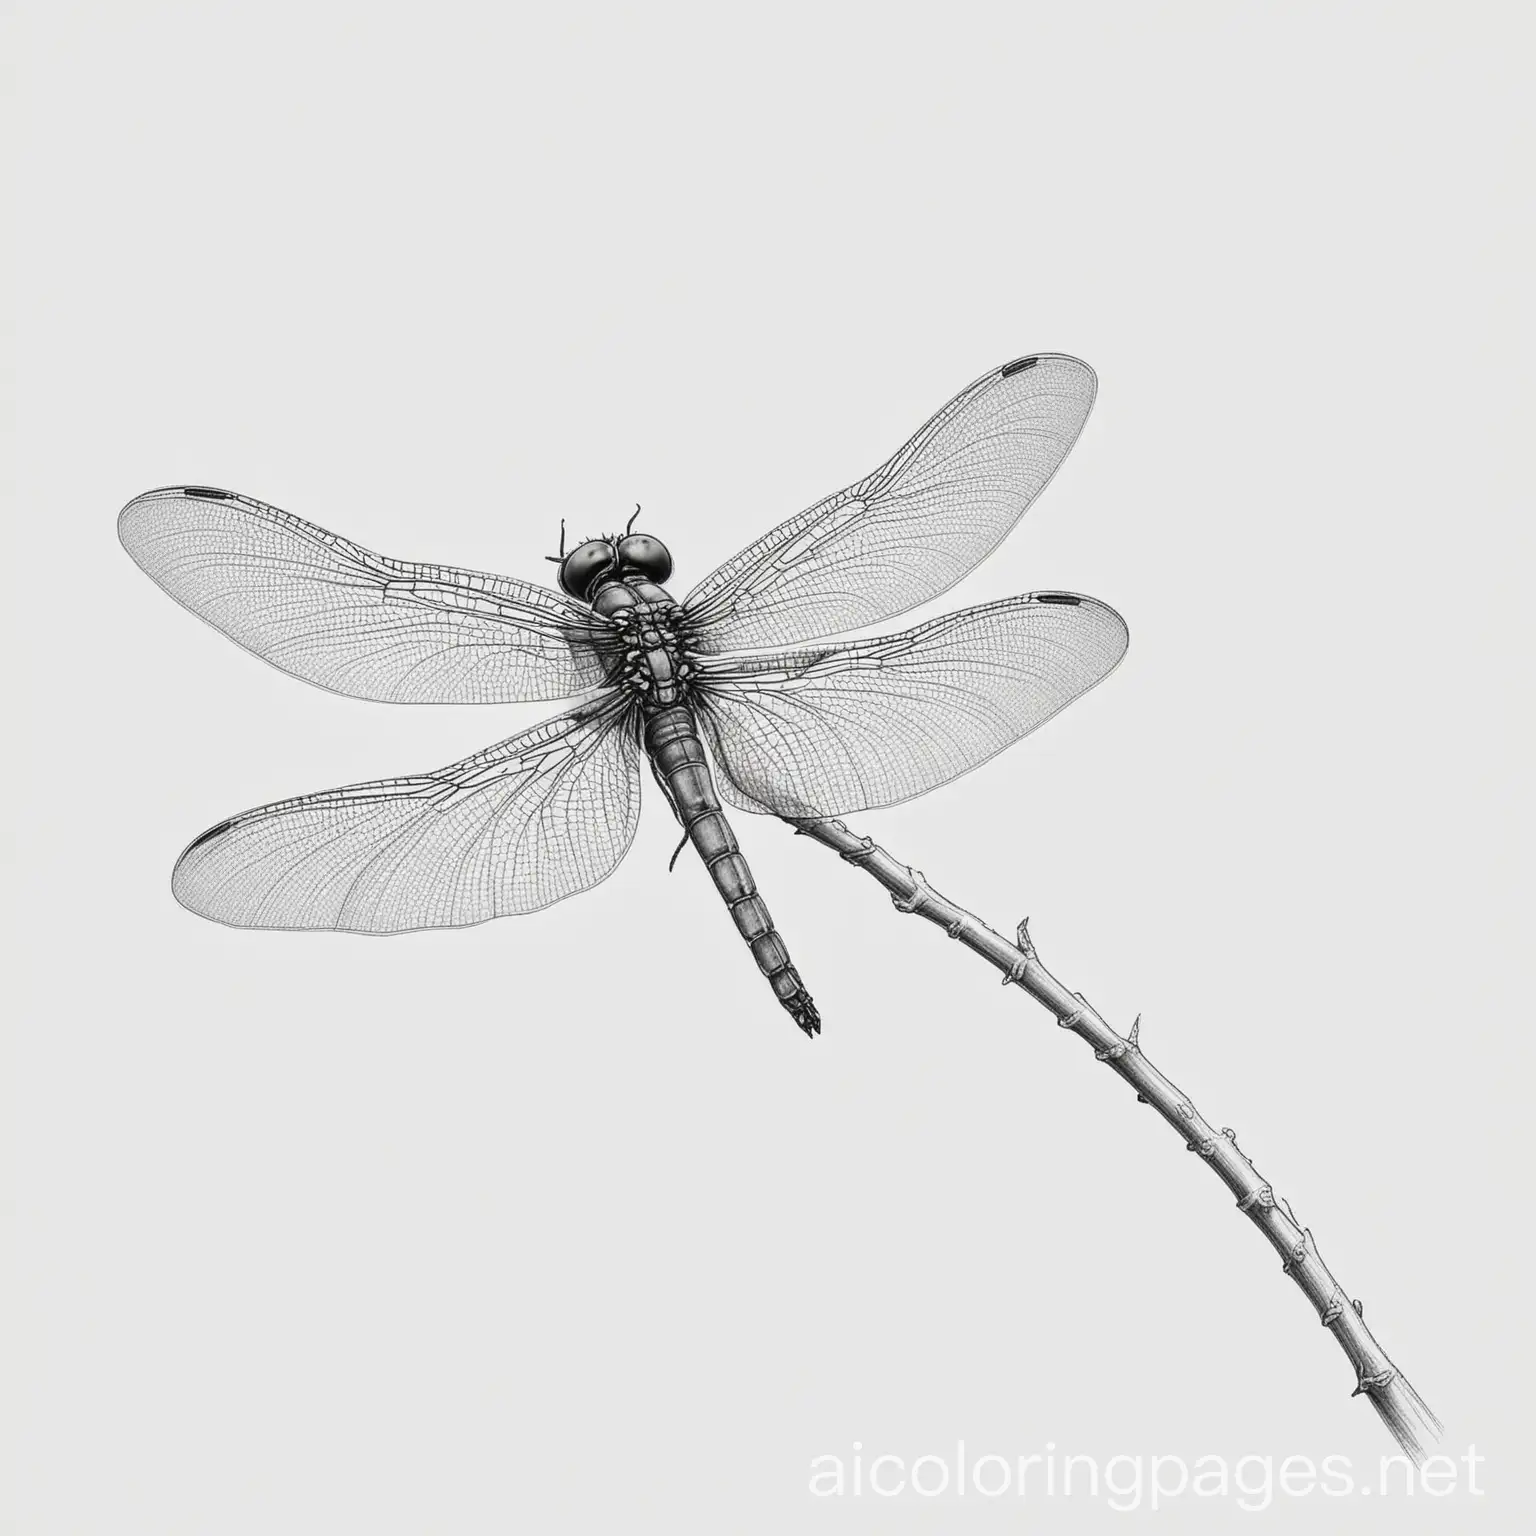 a dragonfly, Coloring Page, black and white, line art, white background, Simplicity, Ample White Space. The background of the coloring page is plain white to make it easy for young children to color within the lines. The outlines of all the subjects are easy to distinguish, making it simple for kids to color without too much difficulty